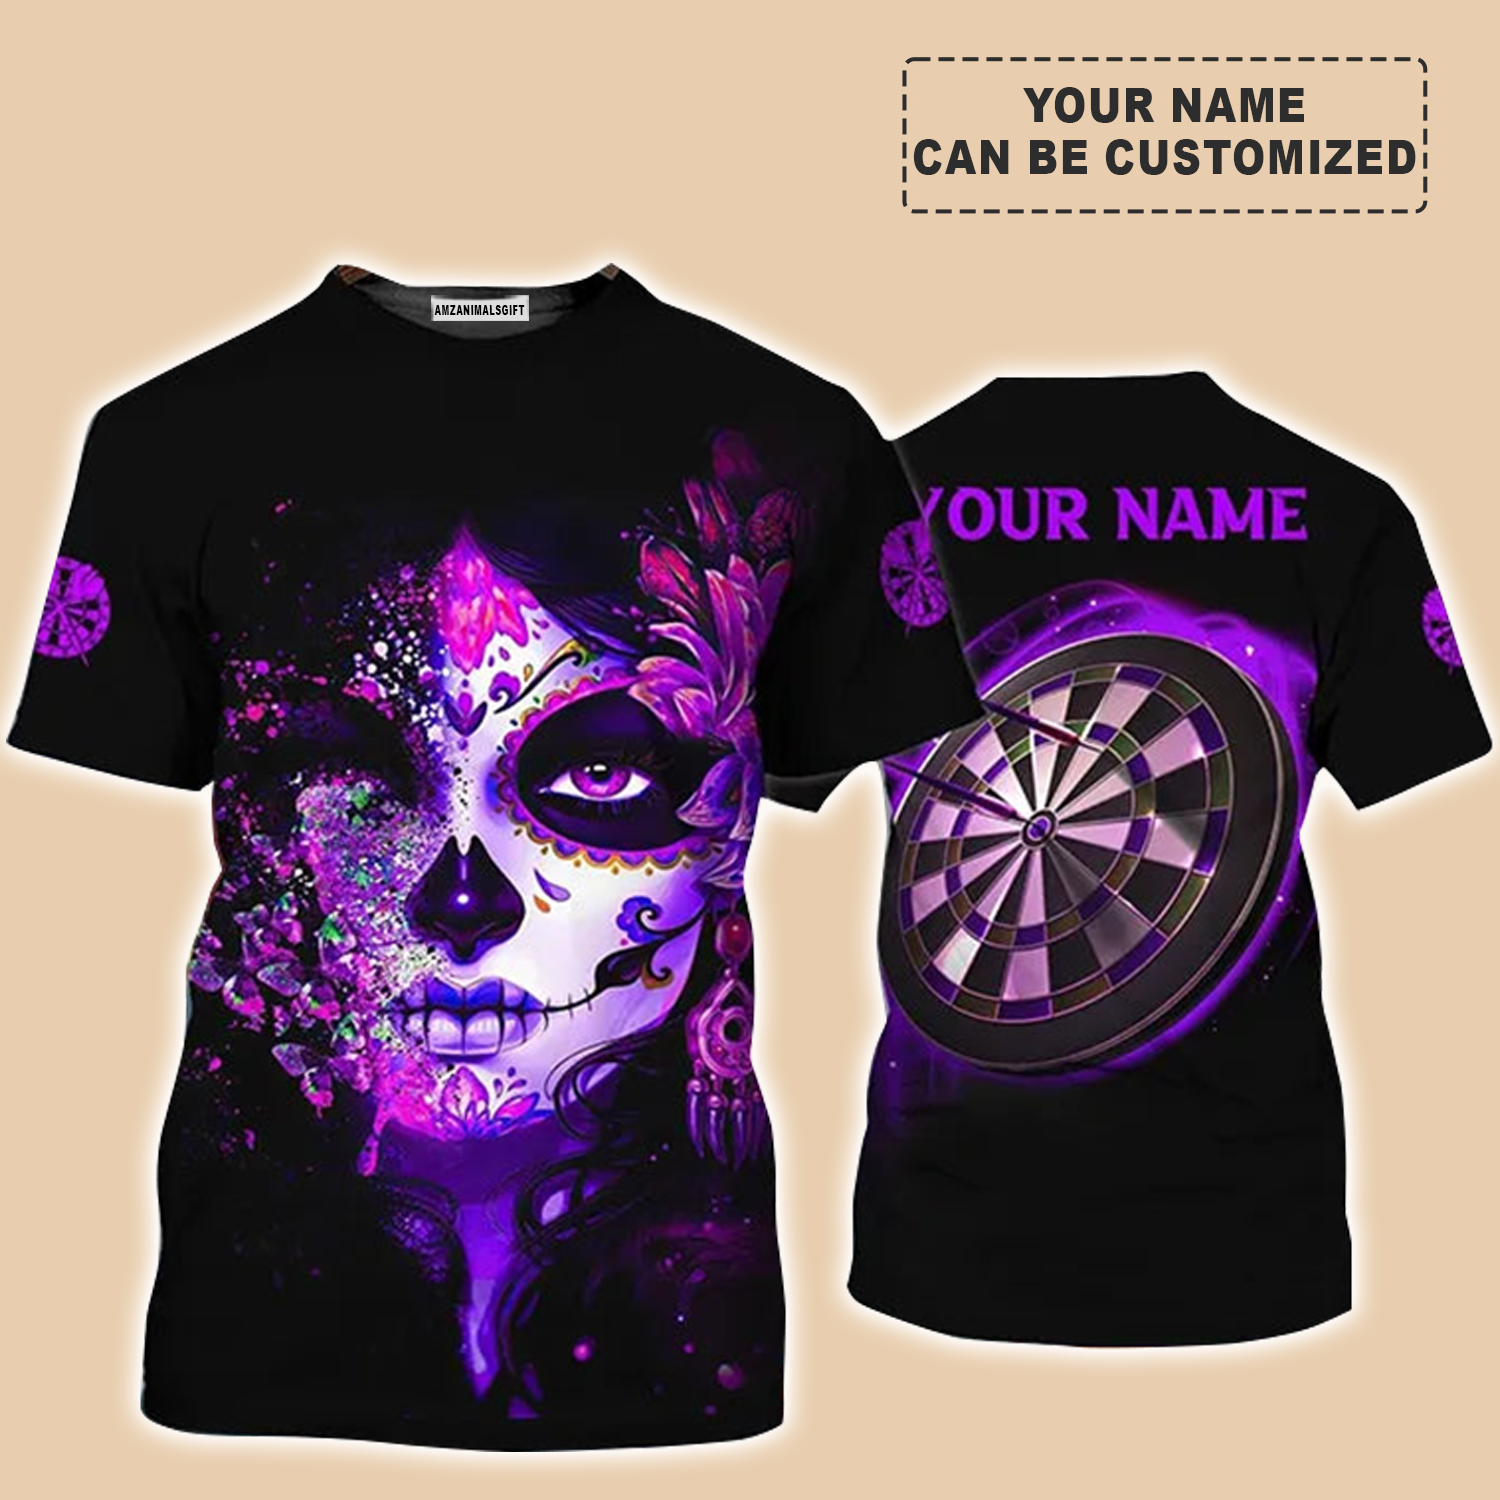 Customized Name Darts T Shirt, Sugar Skull Girl Butterfly And Darts Personalized T Shirt For Men - Gift For Darts Lovers, Darts Player, Dart Team